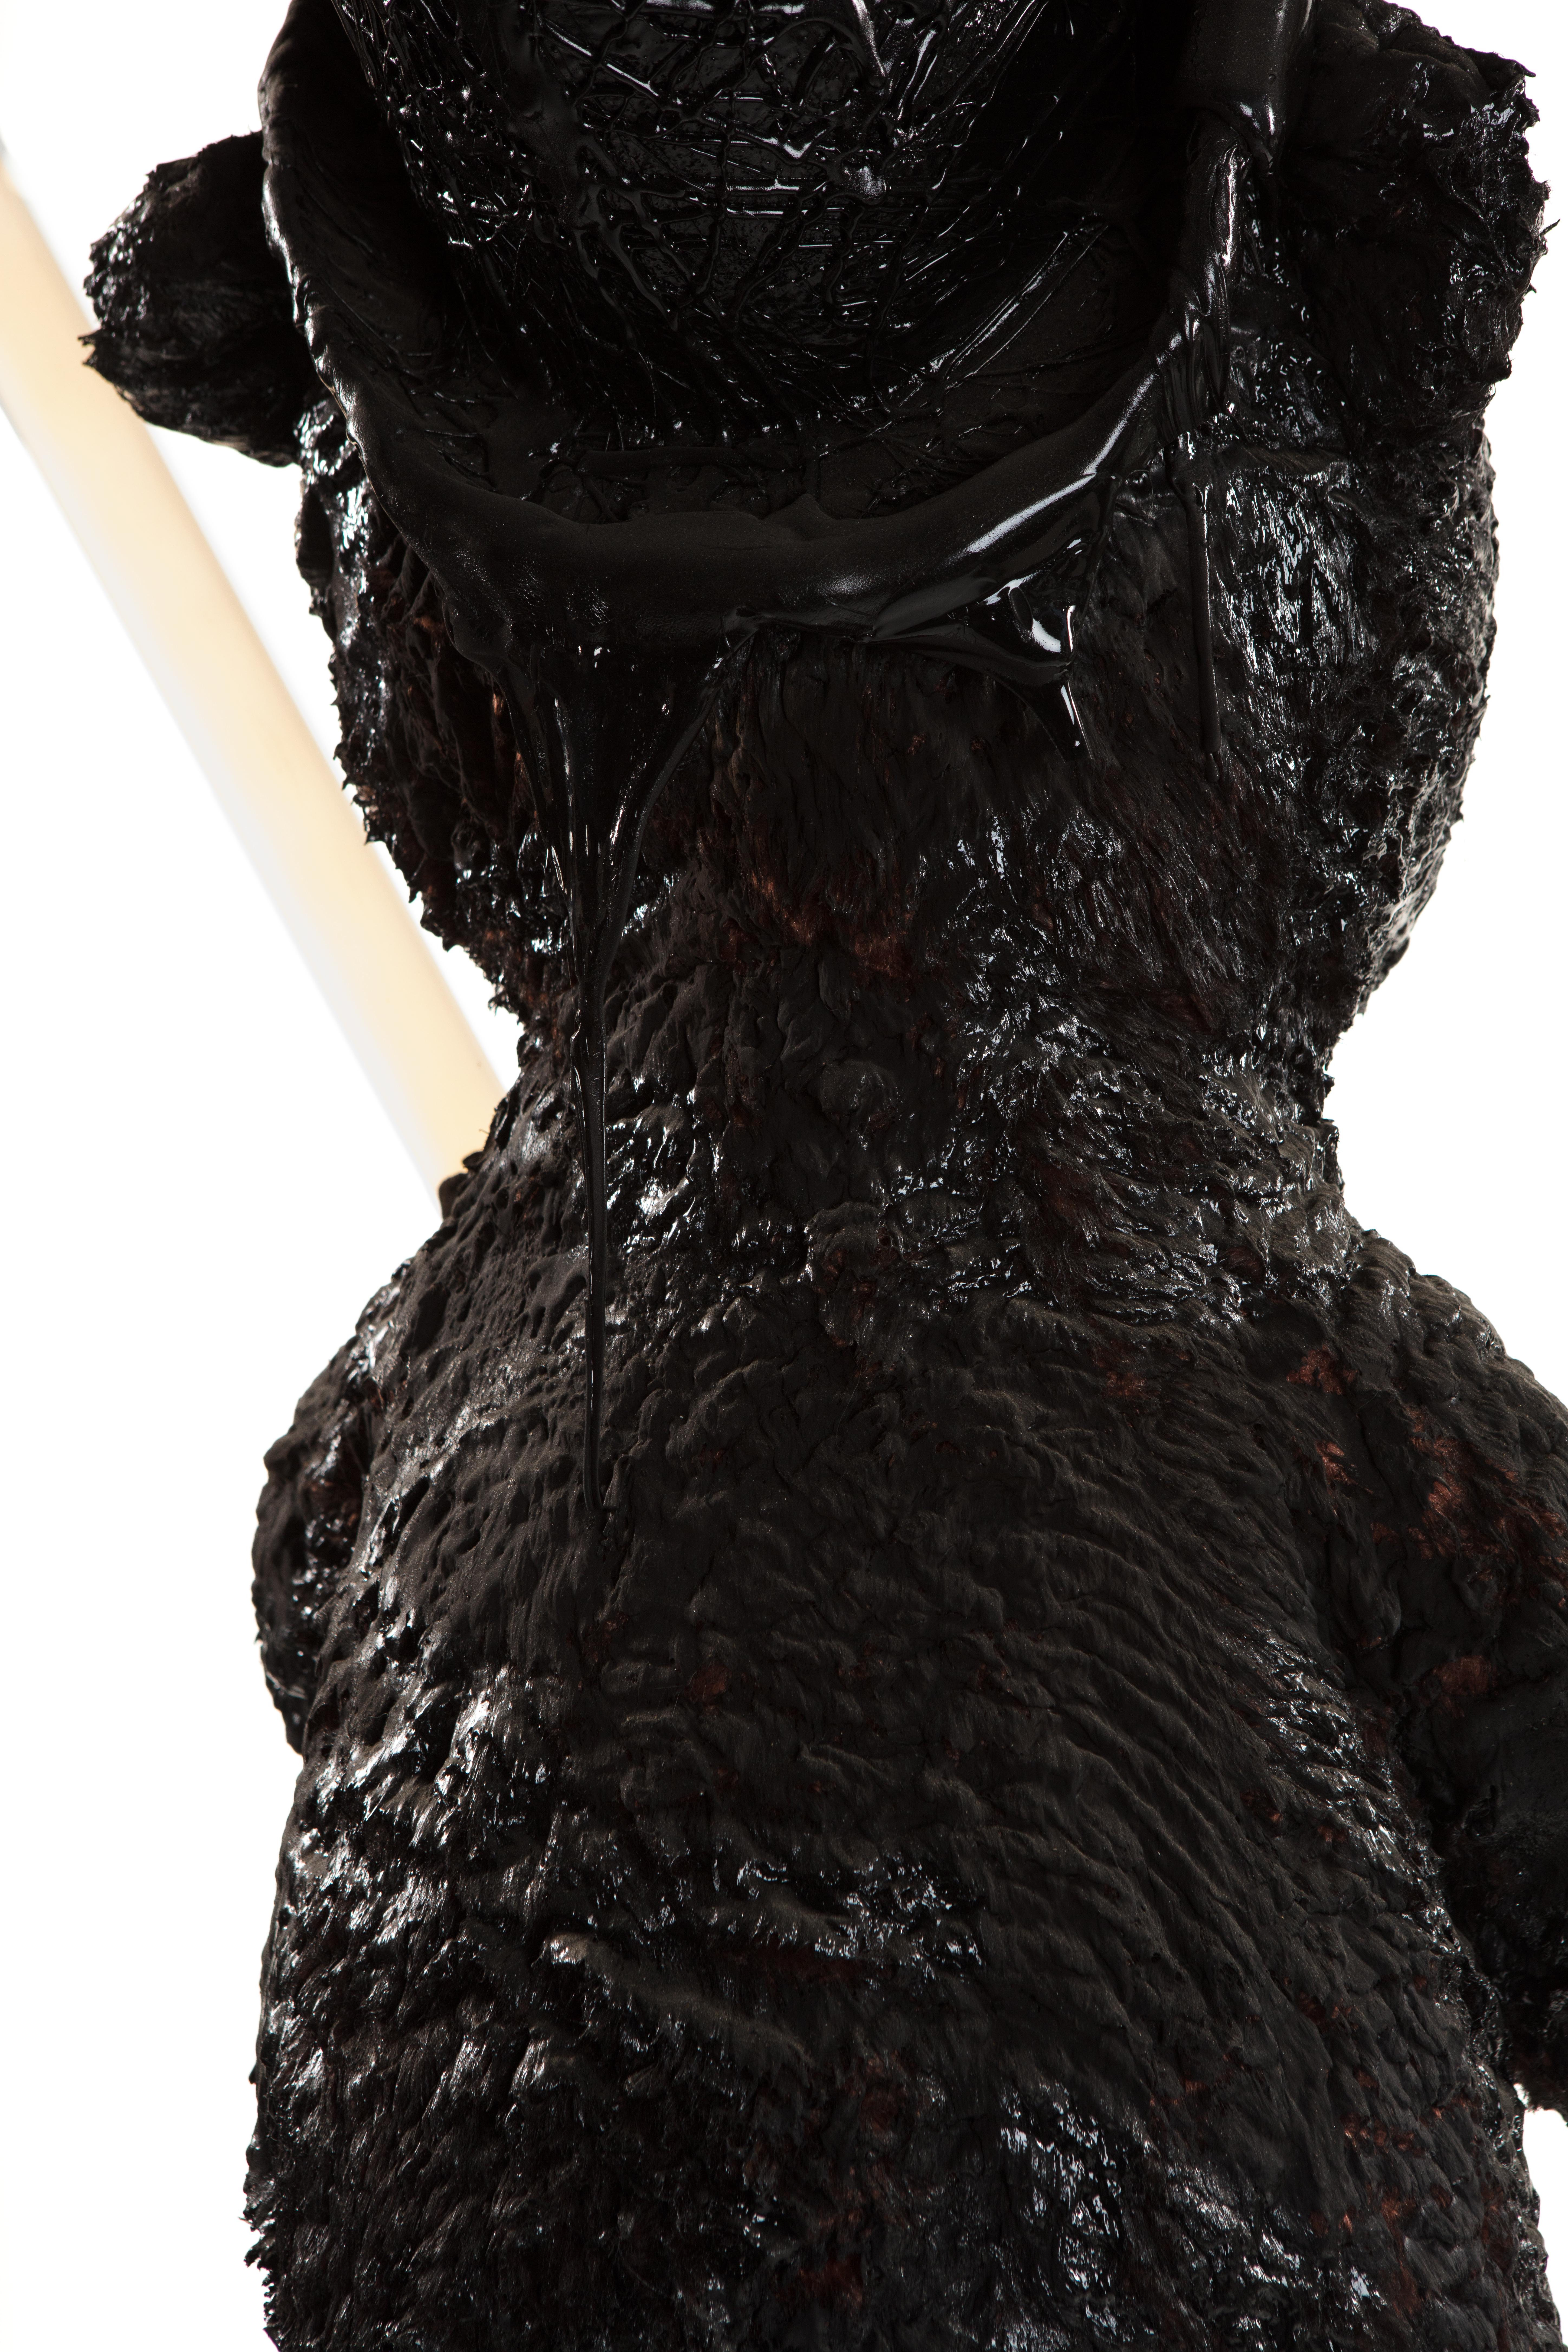 Black TAR Teddy Bear Floor Lamp or Sculpture, 21st Century by Mattia Biagi In New Condition For Sale In Culver City, CA